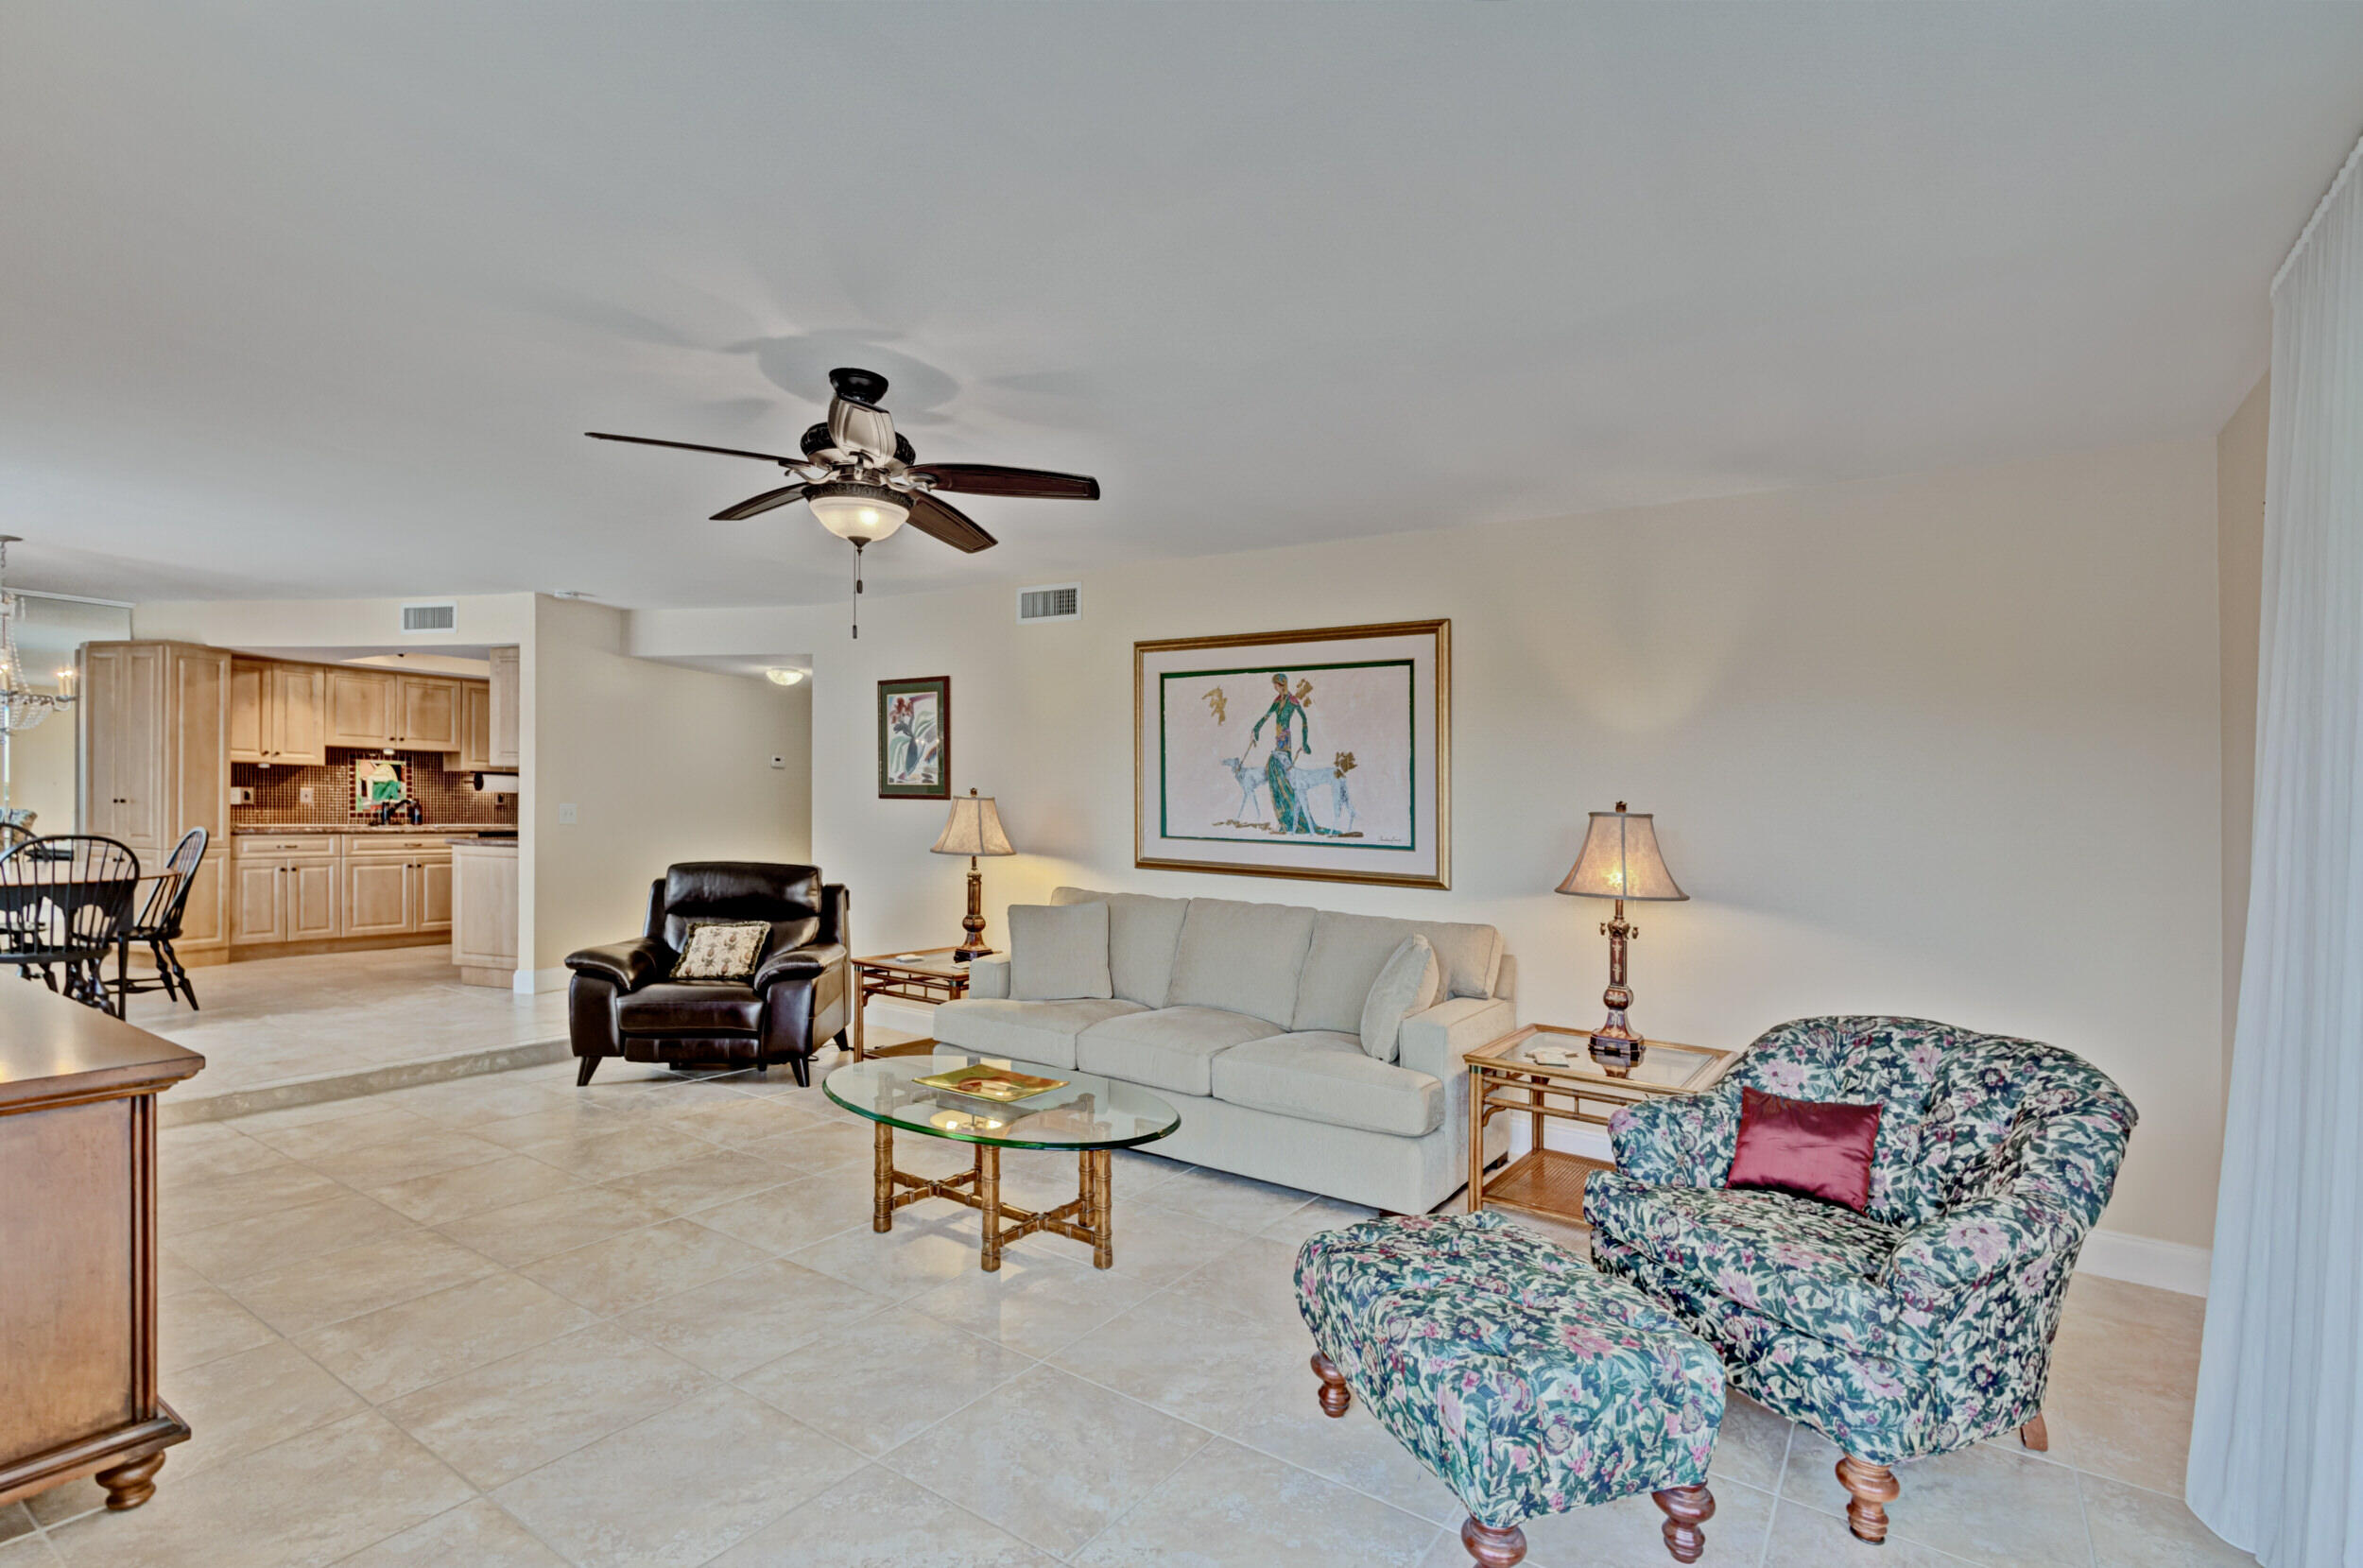 Property for Sale at 11811 Avenue Of The Pga 2-1H, Palm Beach Gardens, Palm Beach County, Florida - Bedrooms: 2 
Bathrooms: 2  - $382,500